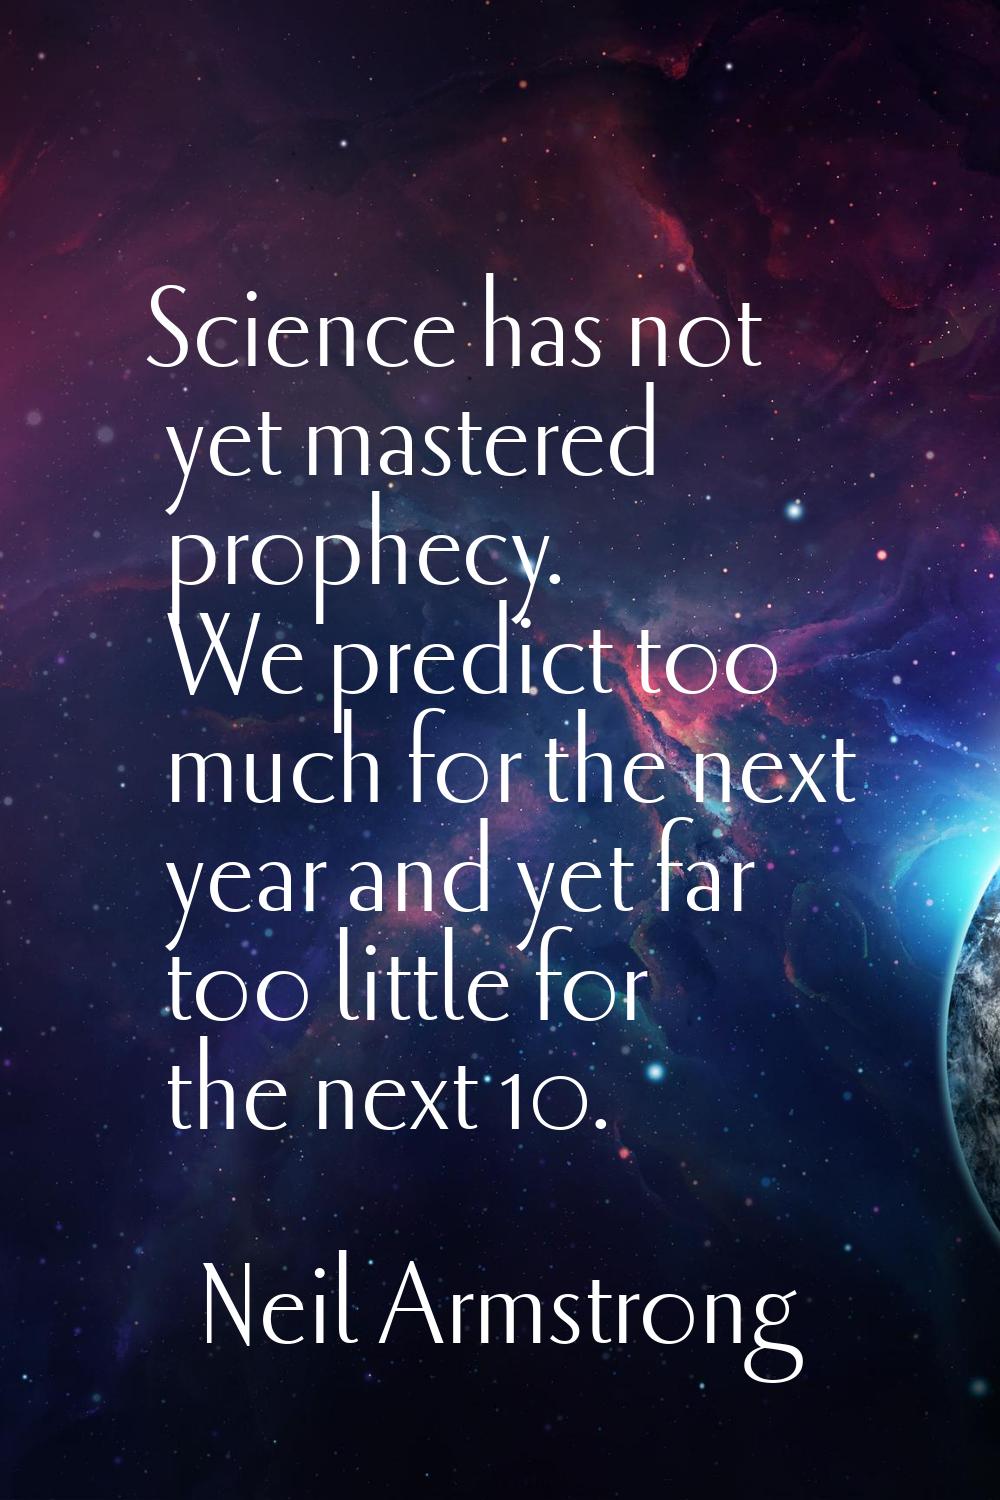 Science has not yet mastered prophecy. We predict too much for the next year and yet far too little